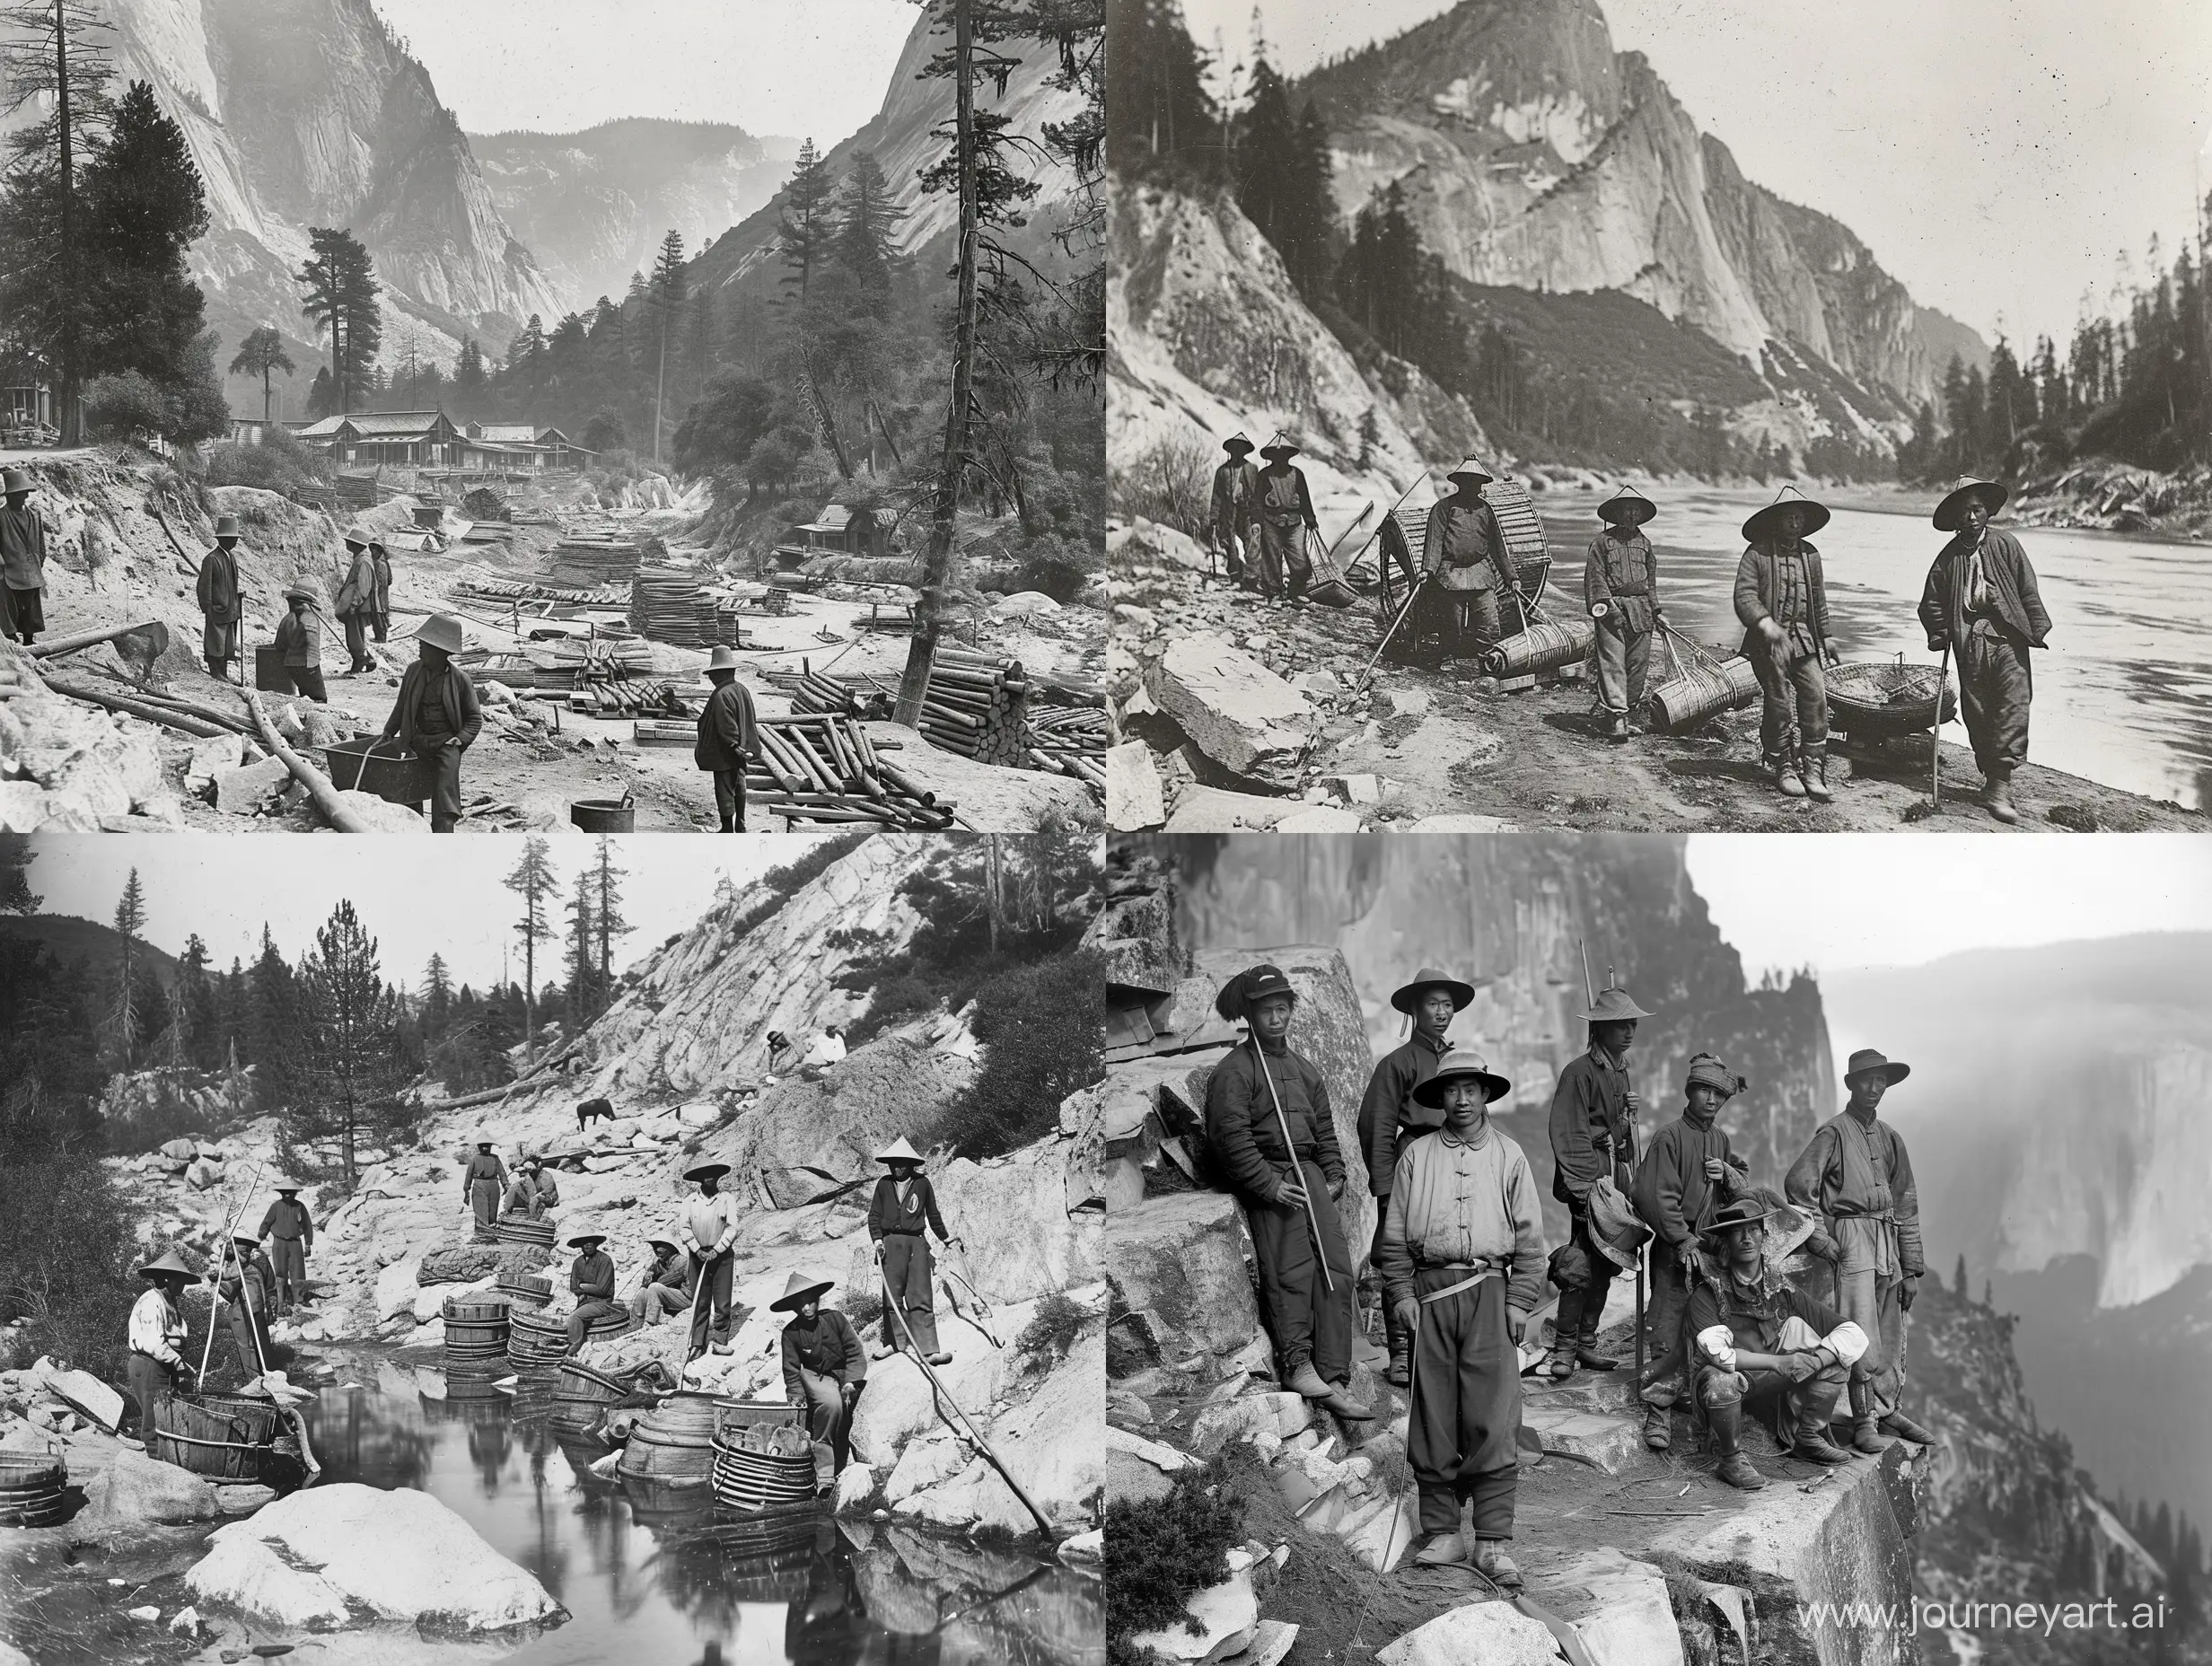 Historical black and white photographs dipicting the life of Chinese workers at Yosemite in the late 1800s.
